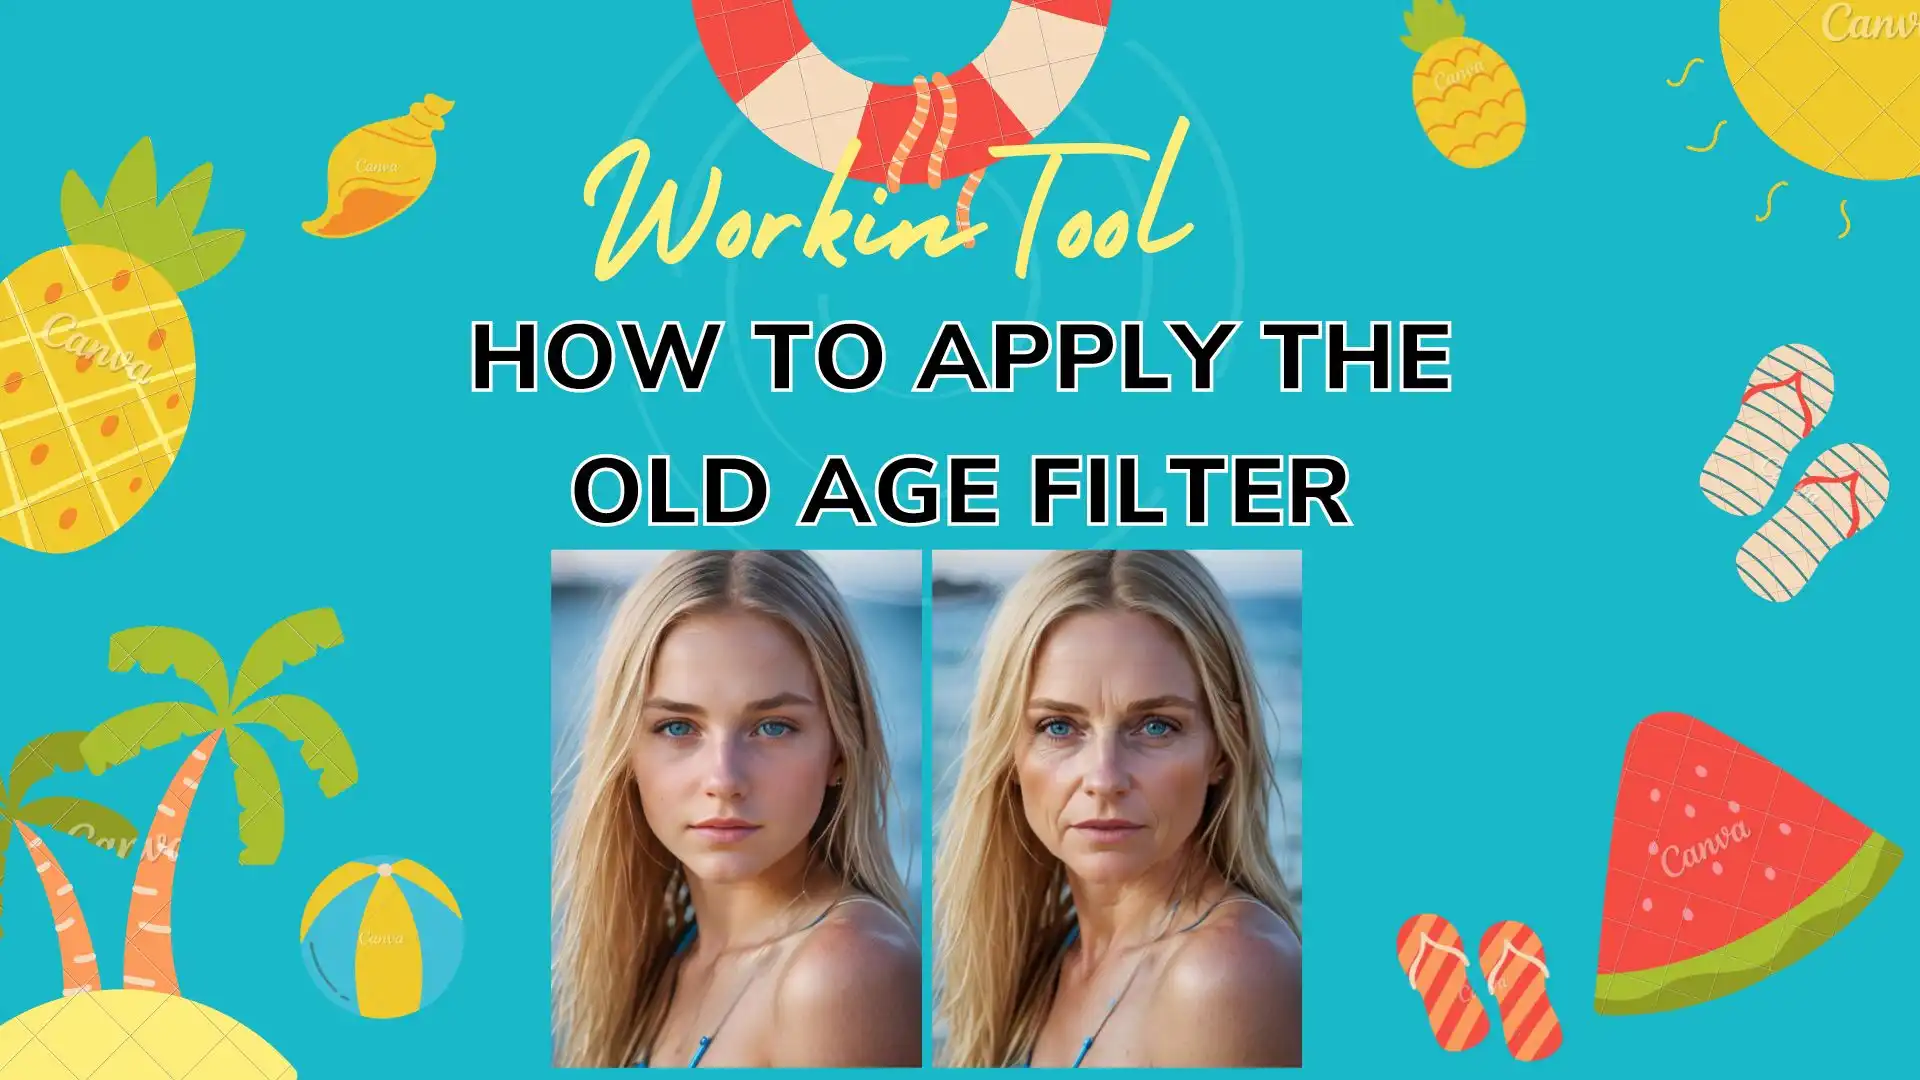 How to Use an Old Age Filter to Make You Look Old